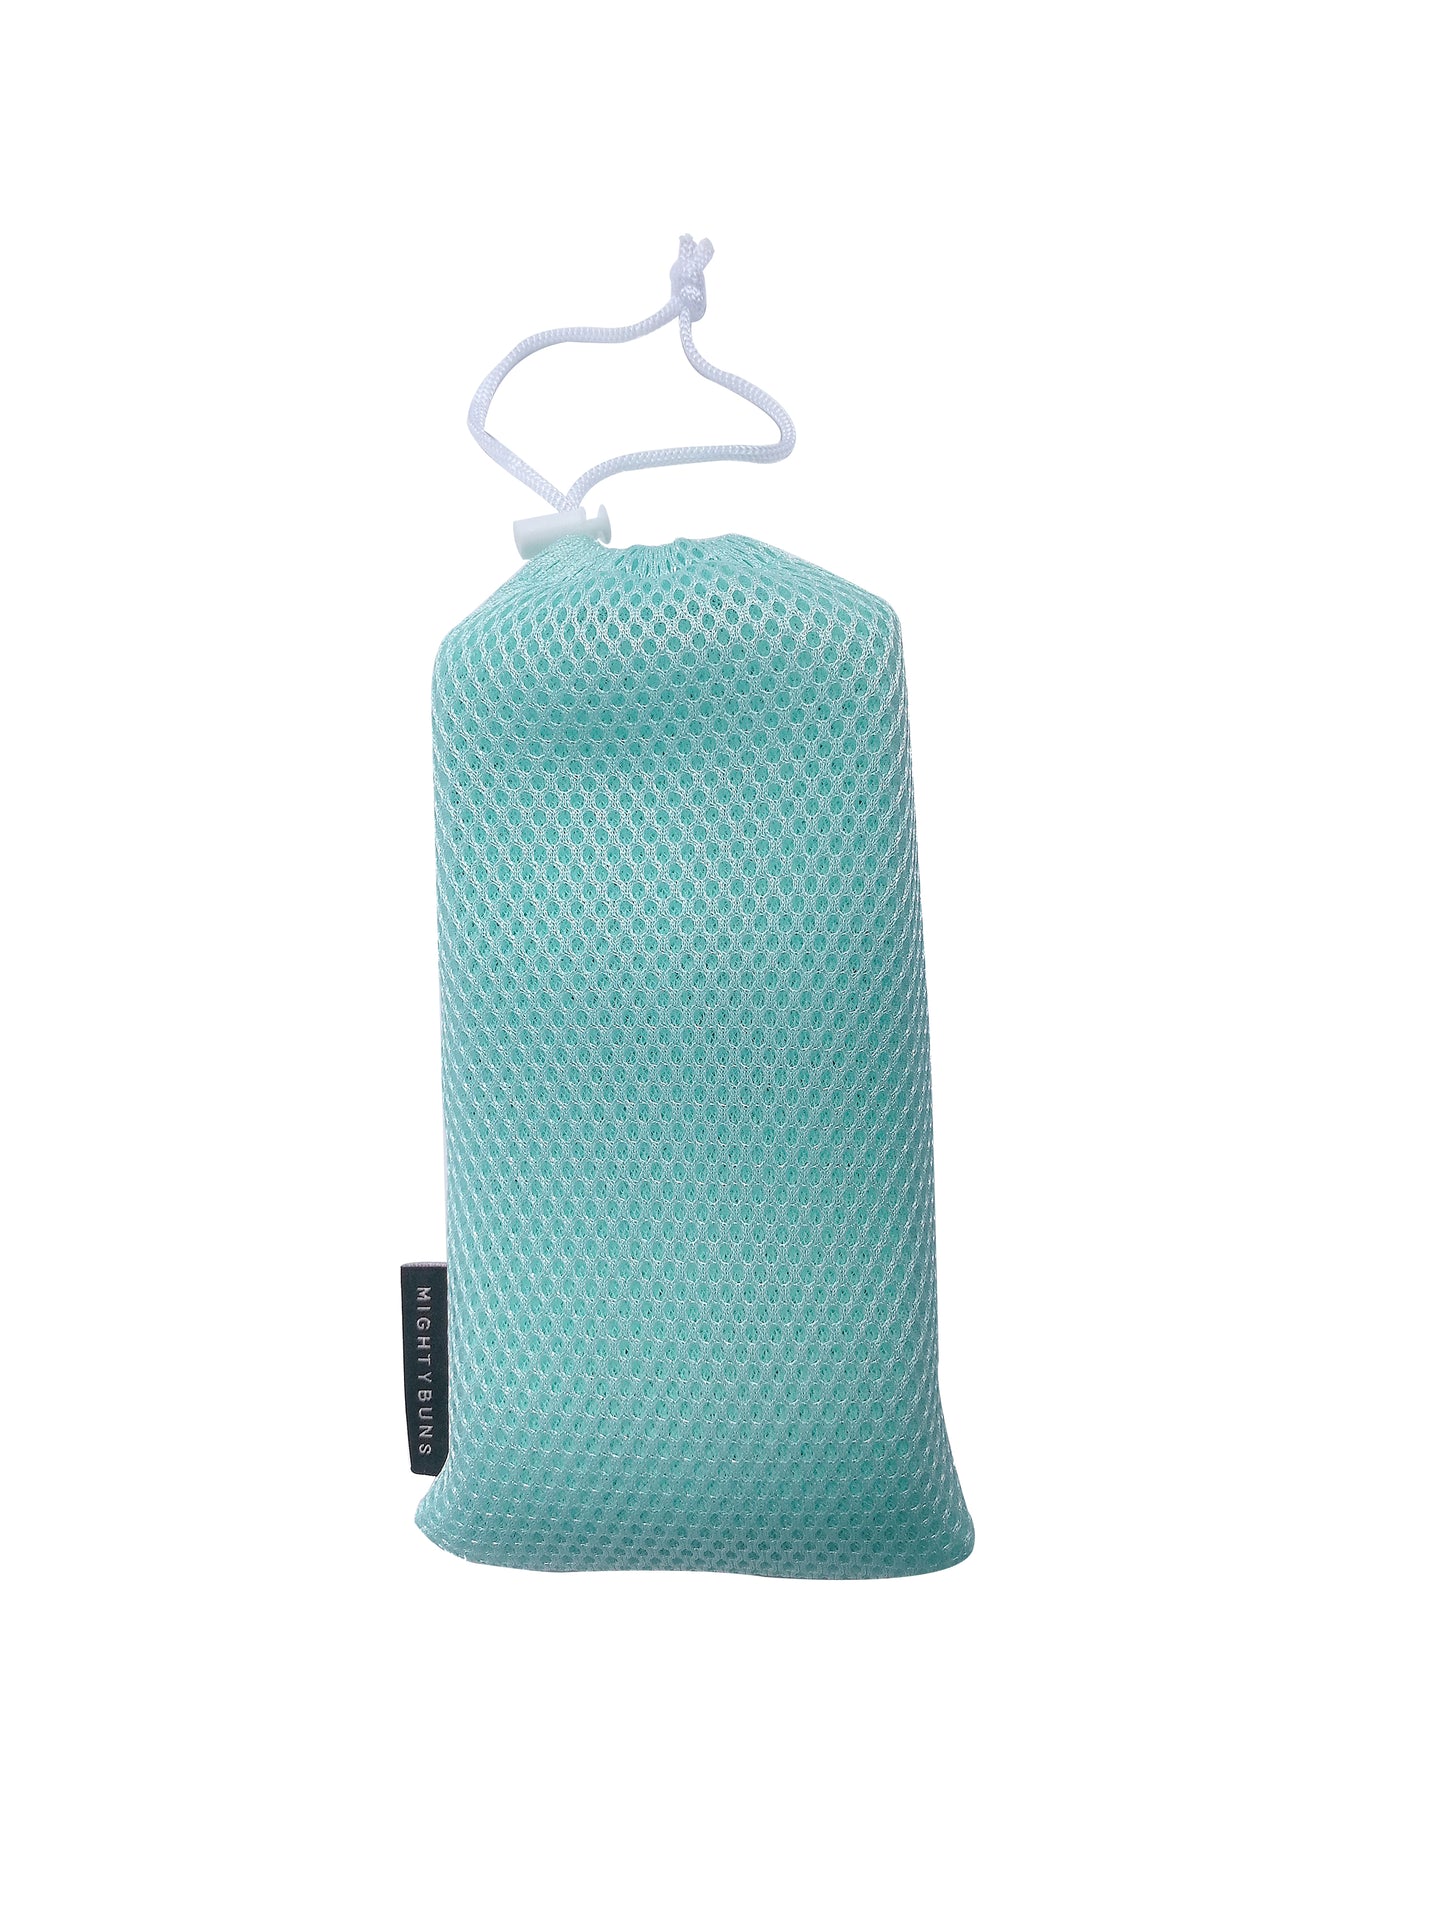 free mint blue mesh bag with purchase of resistance band